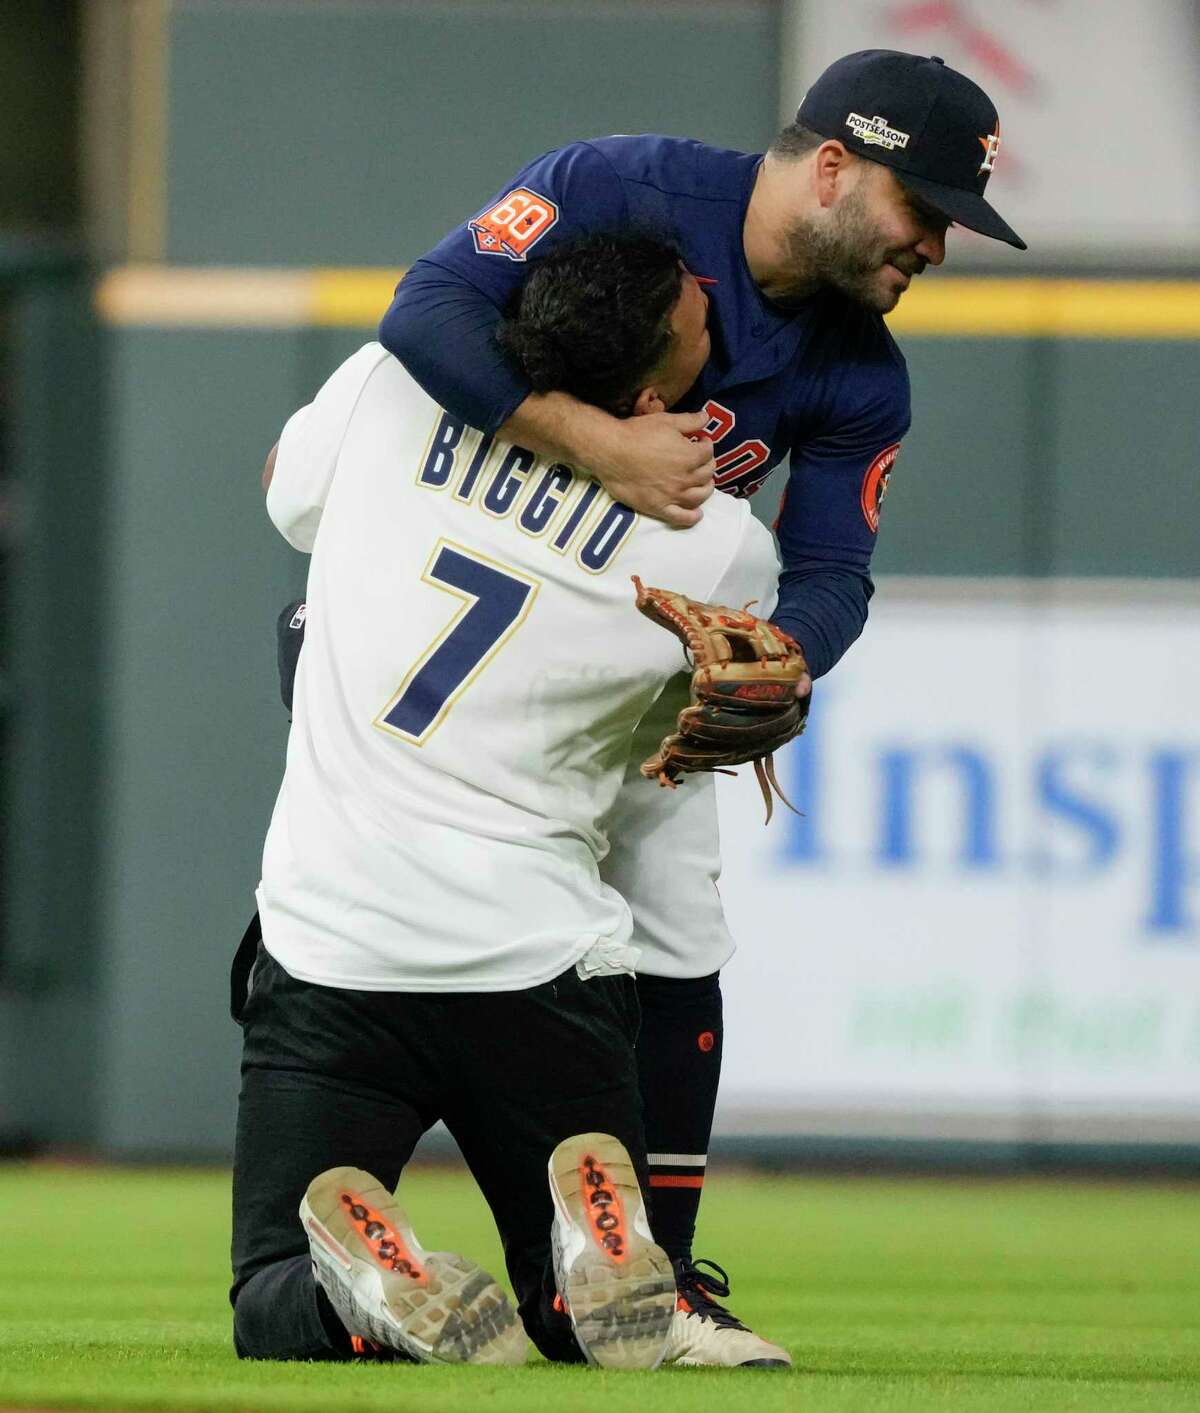 Wish granted: Astros fan who ran out on field to get selfie with Jose  Altuve gets long-awaited pic with baseman at Academy Sports